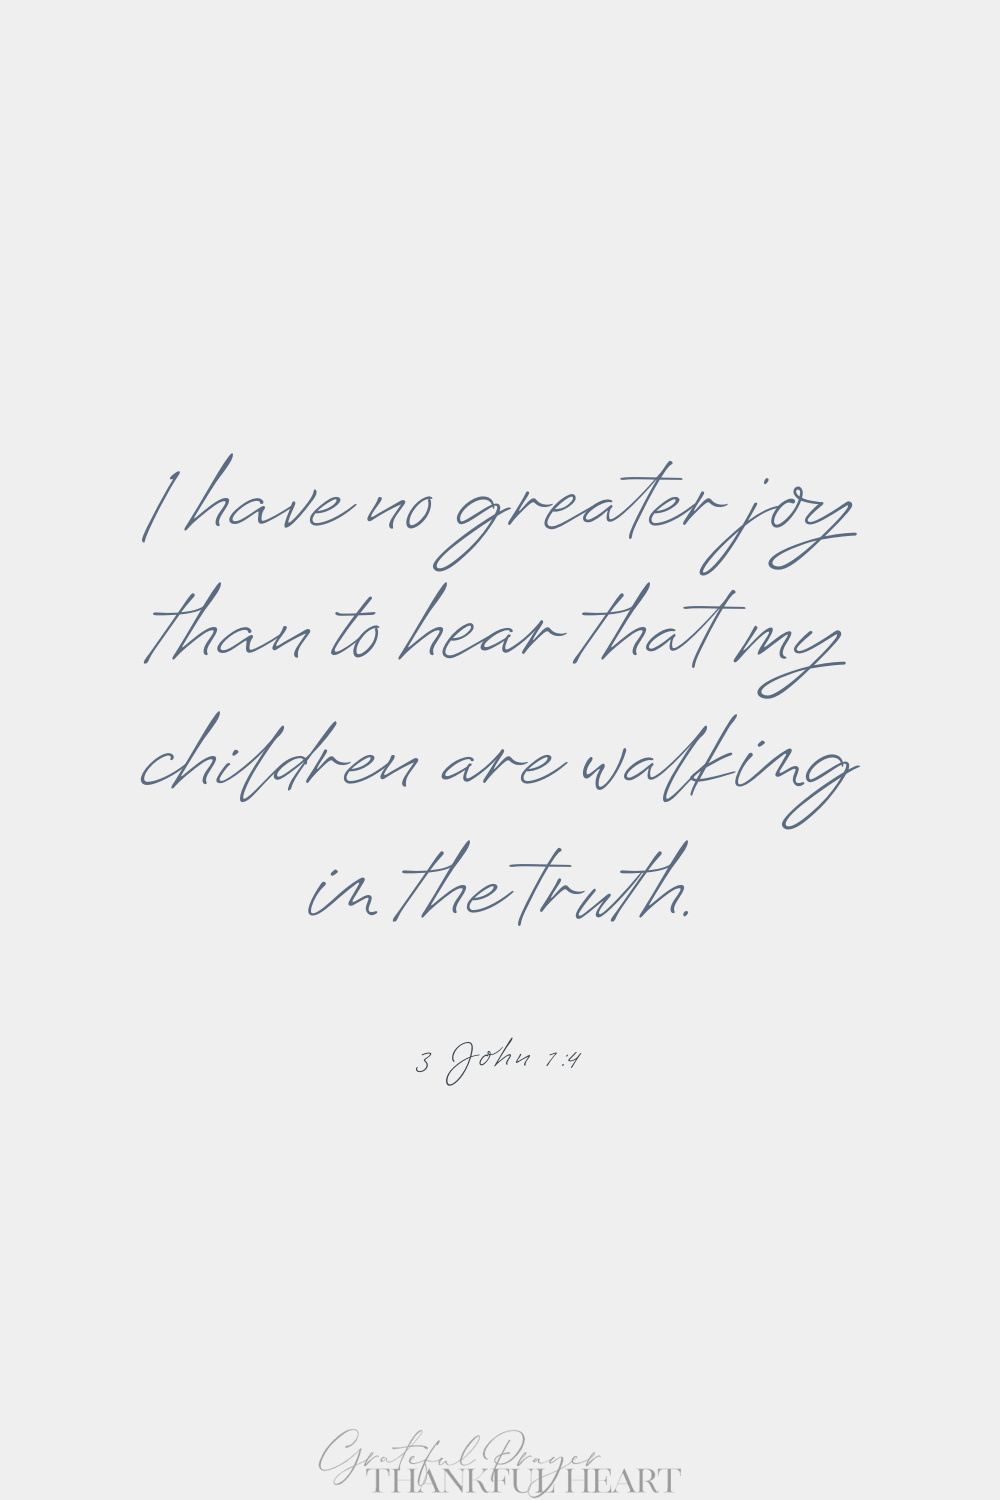 prayer for adult children I have no greater joy than to hear that my children are walking in the truth